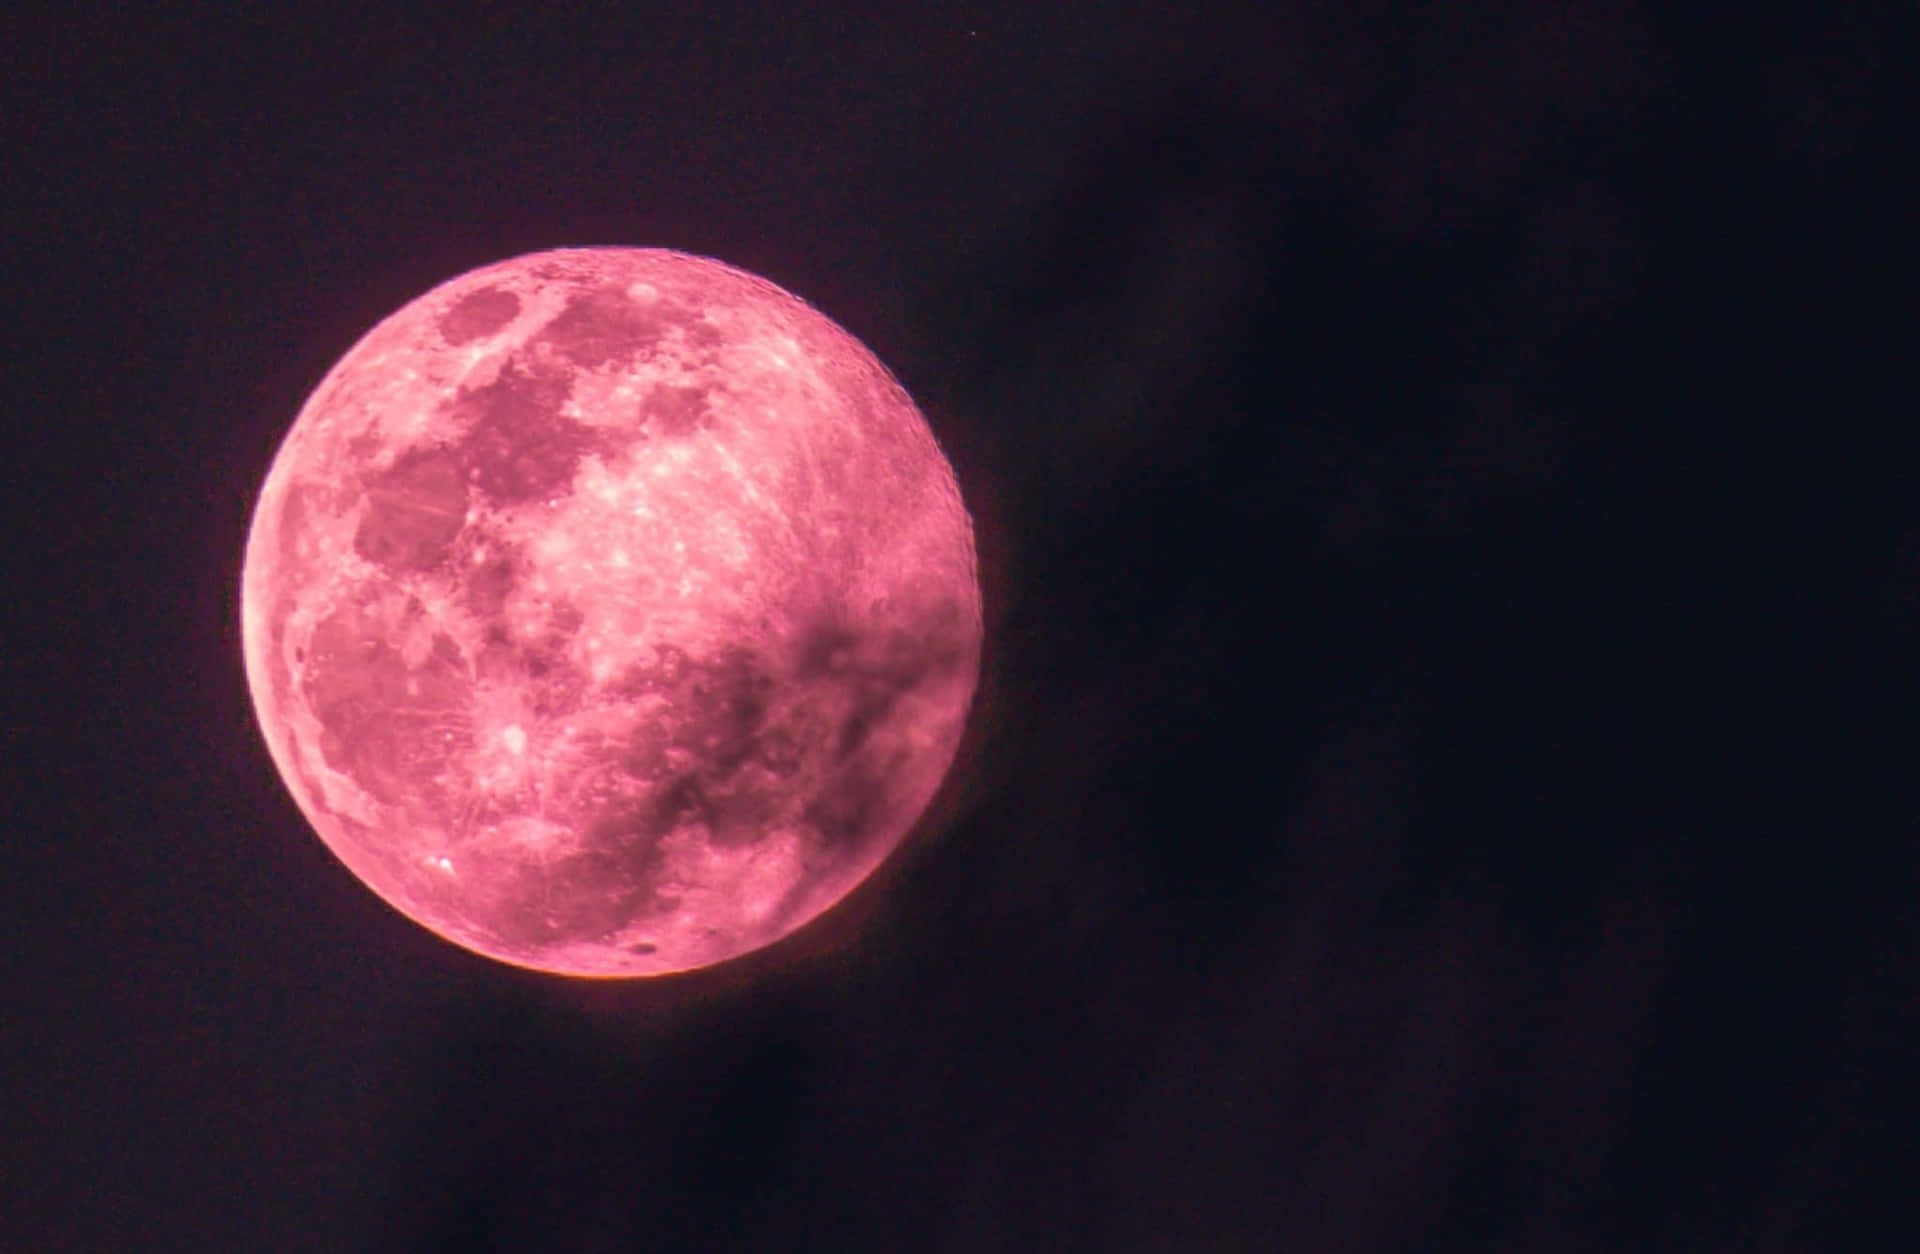 "Experience the beauty of a real pink moon"